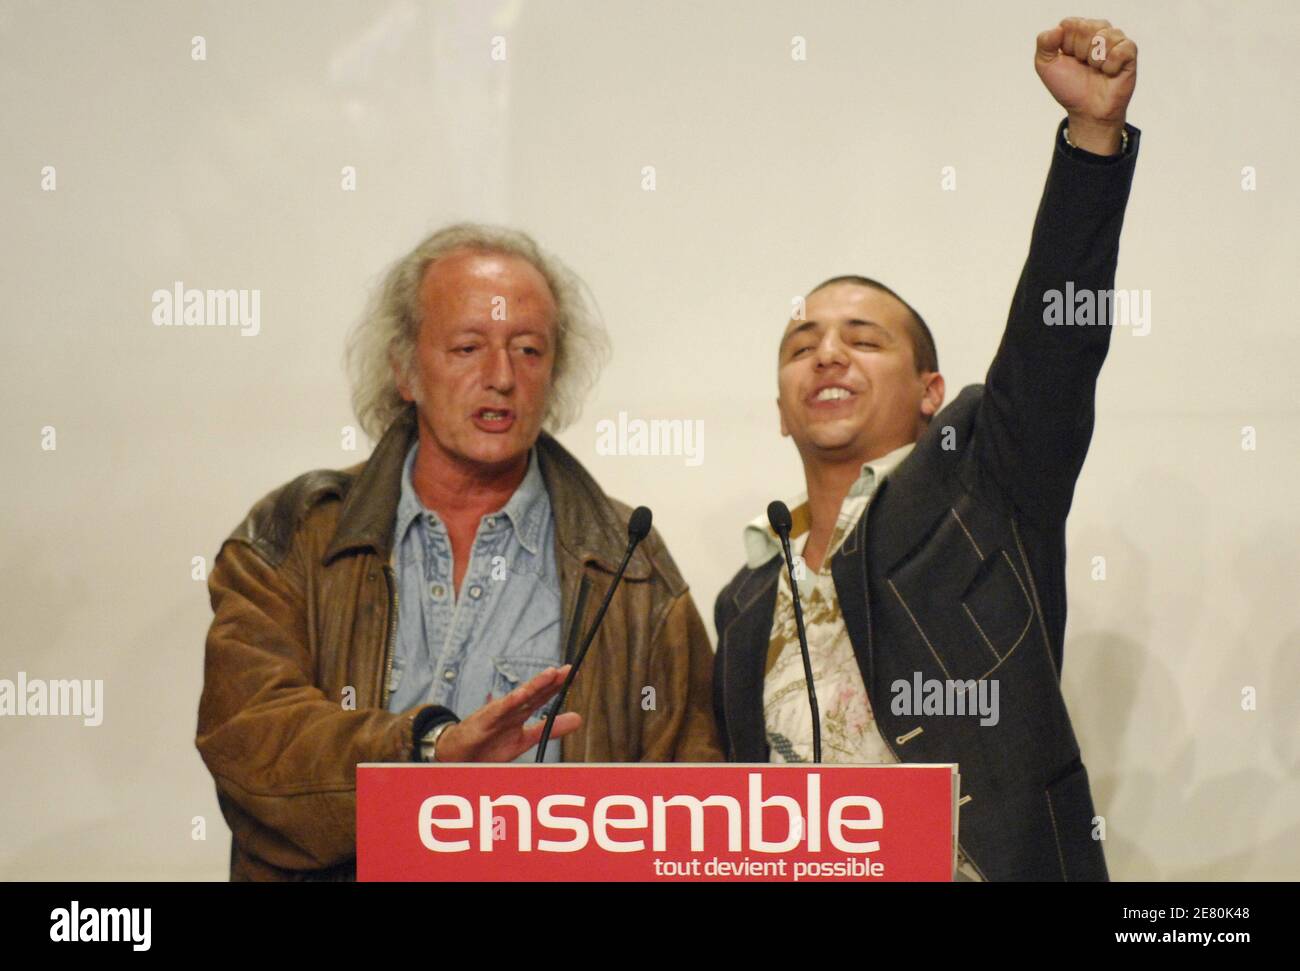 Musician Didier Barbelivien and singer Faudel address Nicolas Sarkozy's supporters at the Salle Gaveau in Paris, May 6, 2007. French voters elected reform-minded Nicolas Sarkozy as their new president on Sunday, giving him a comfortable winning margin, preliminary official results and projections from four polling agencies showed. With more than half of the vote counted, Sarkozy was scoring just over 53 percent to a little more than 46 percent for Socialist Segolene Royal. Polling agencies also had the conservative Sarkozy winning 53 percent of the vote compared to 47 for Royal amid massive tu Stock Photo